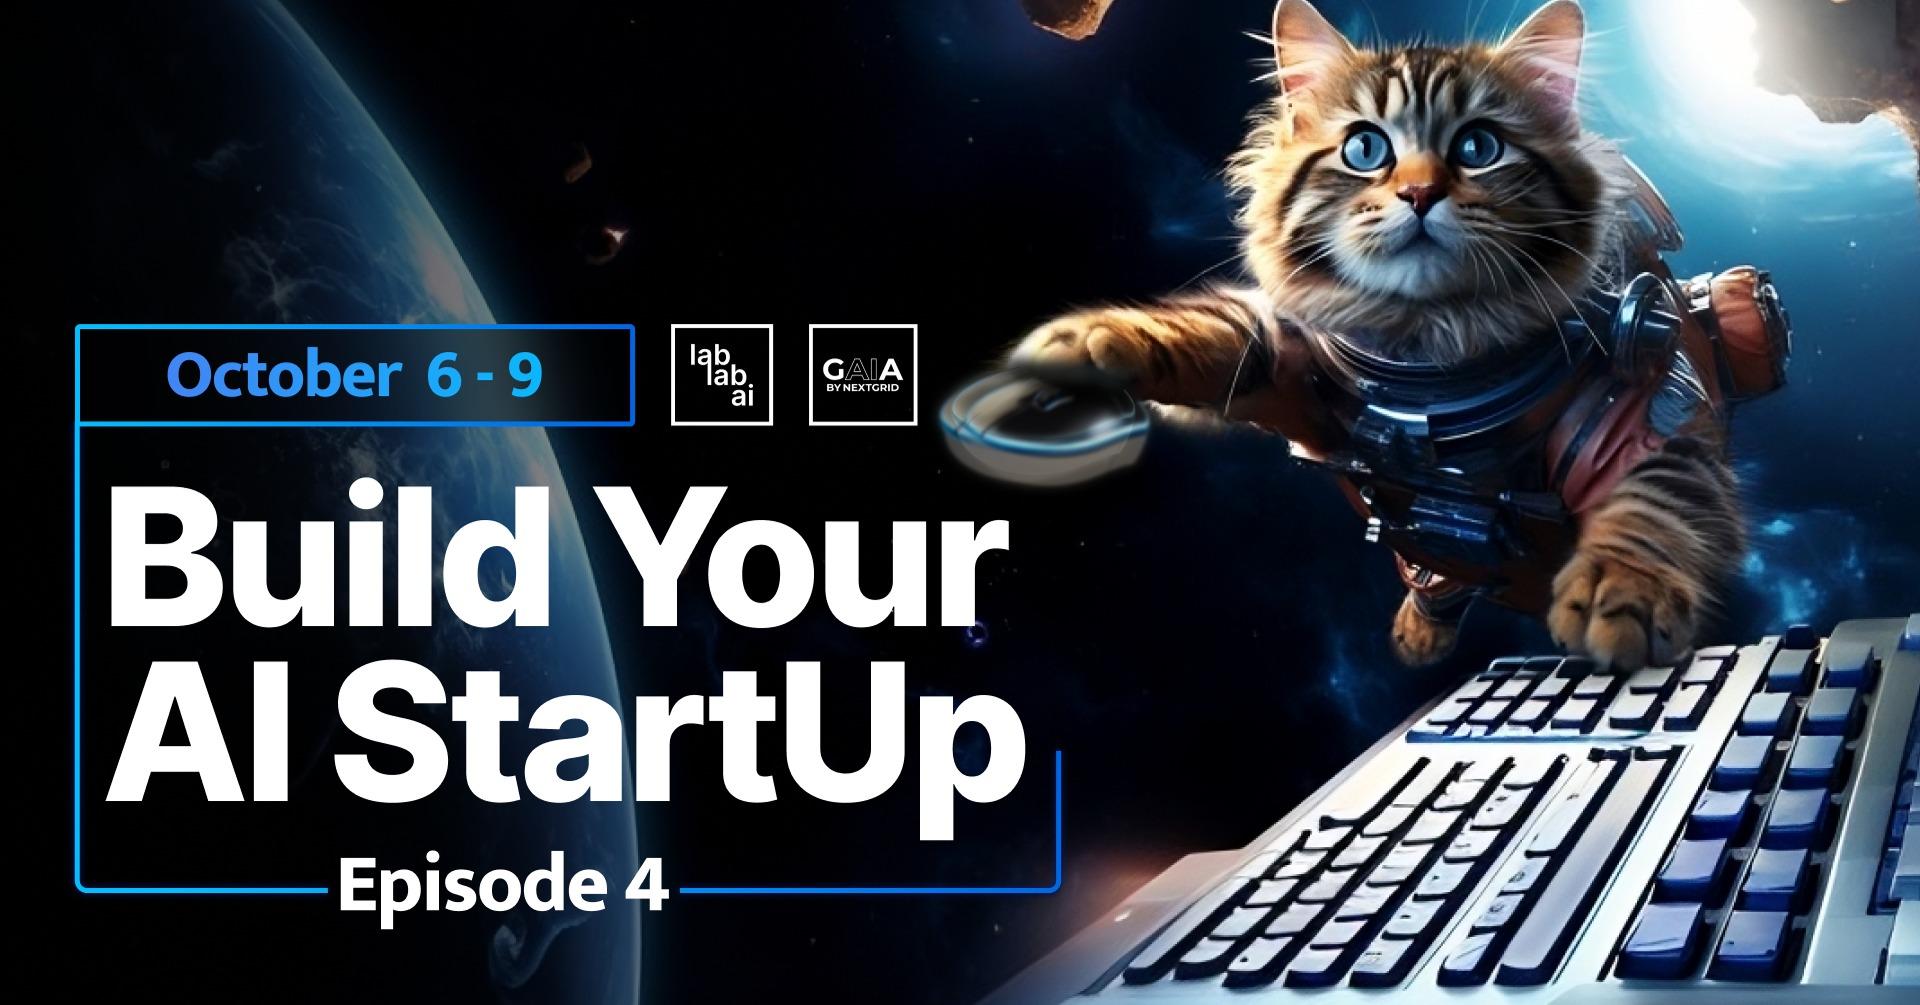 Build Your AI StartUp. Episode 4 image